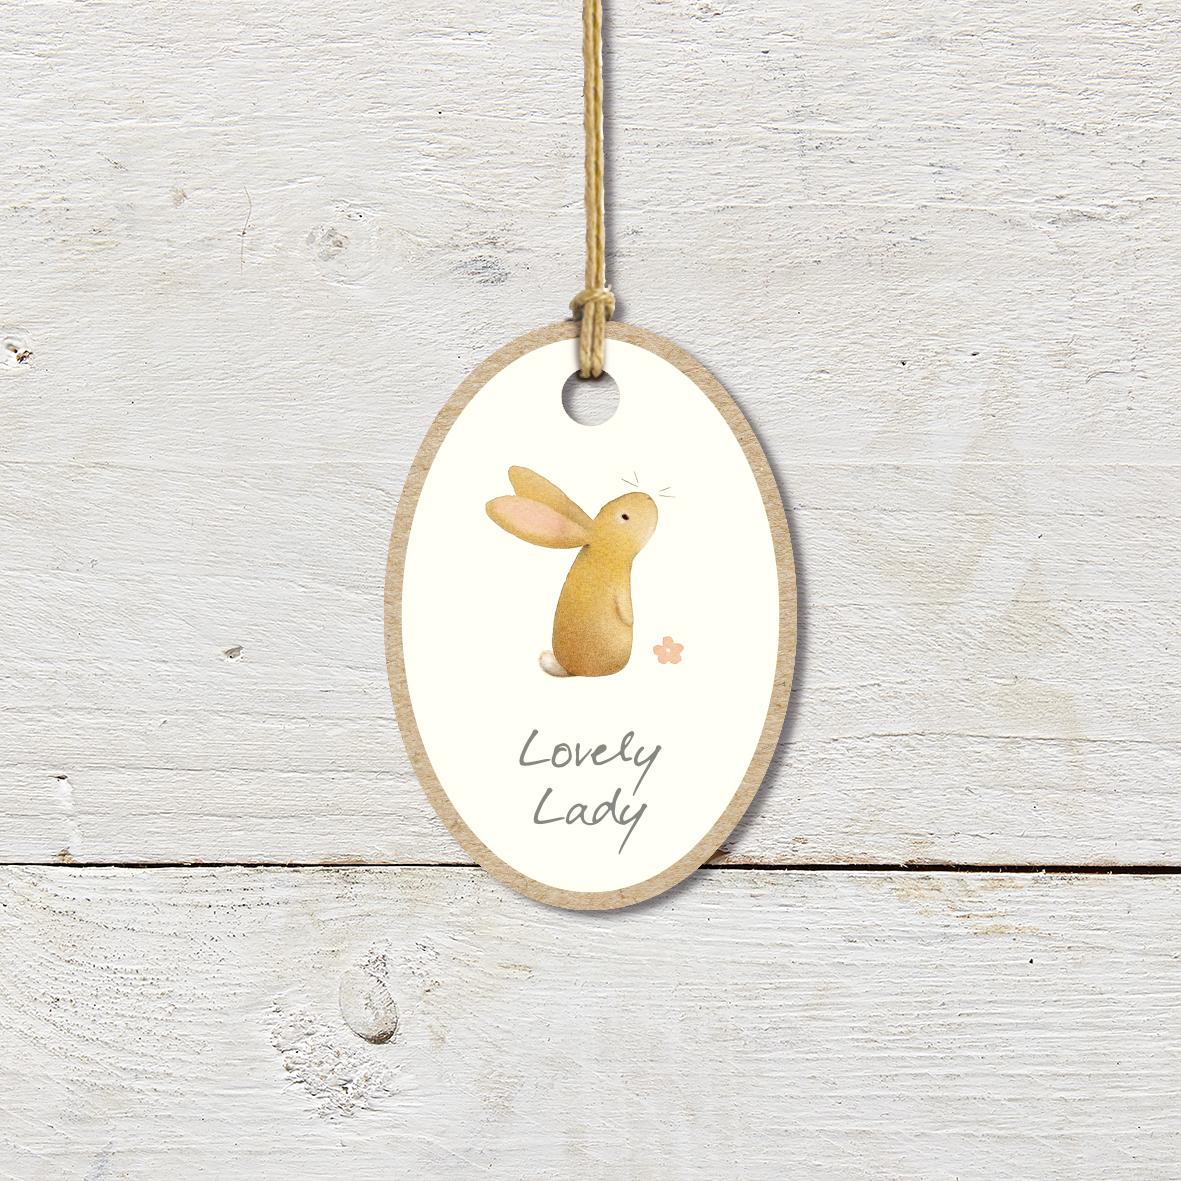 Small Wooden Keepsake Plaque/Tag featuring a cute rabbit with a ’Lovely Lady’ caption.